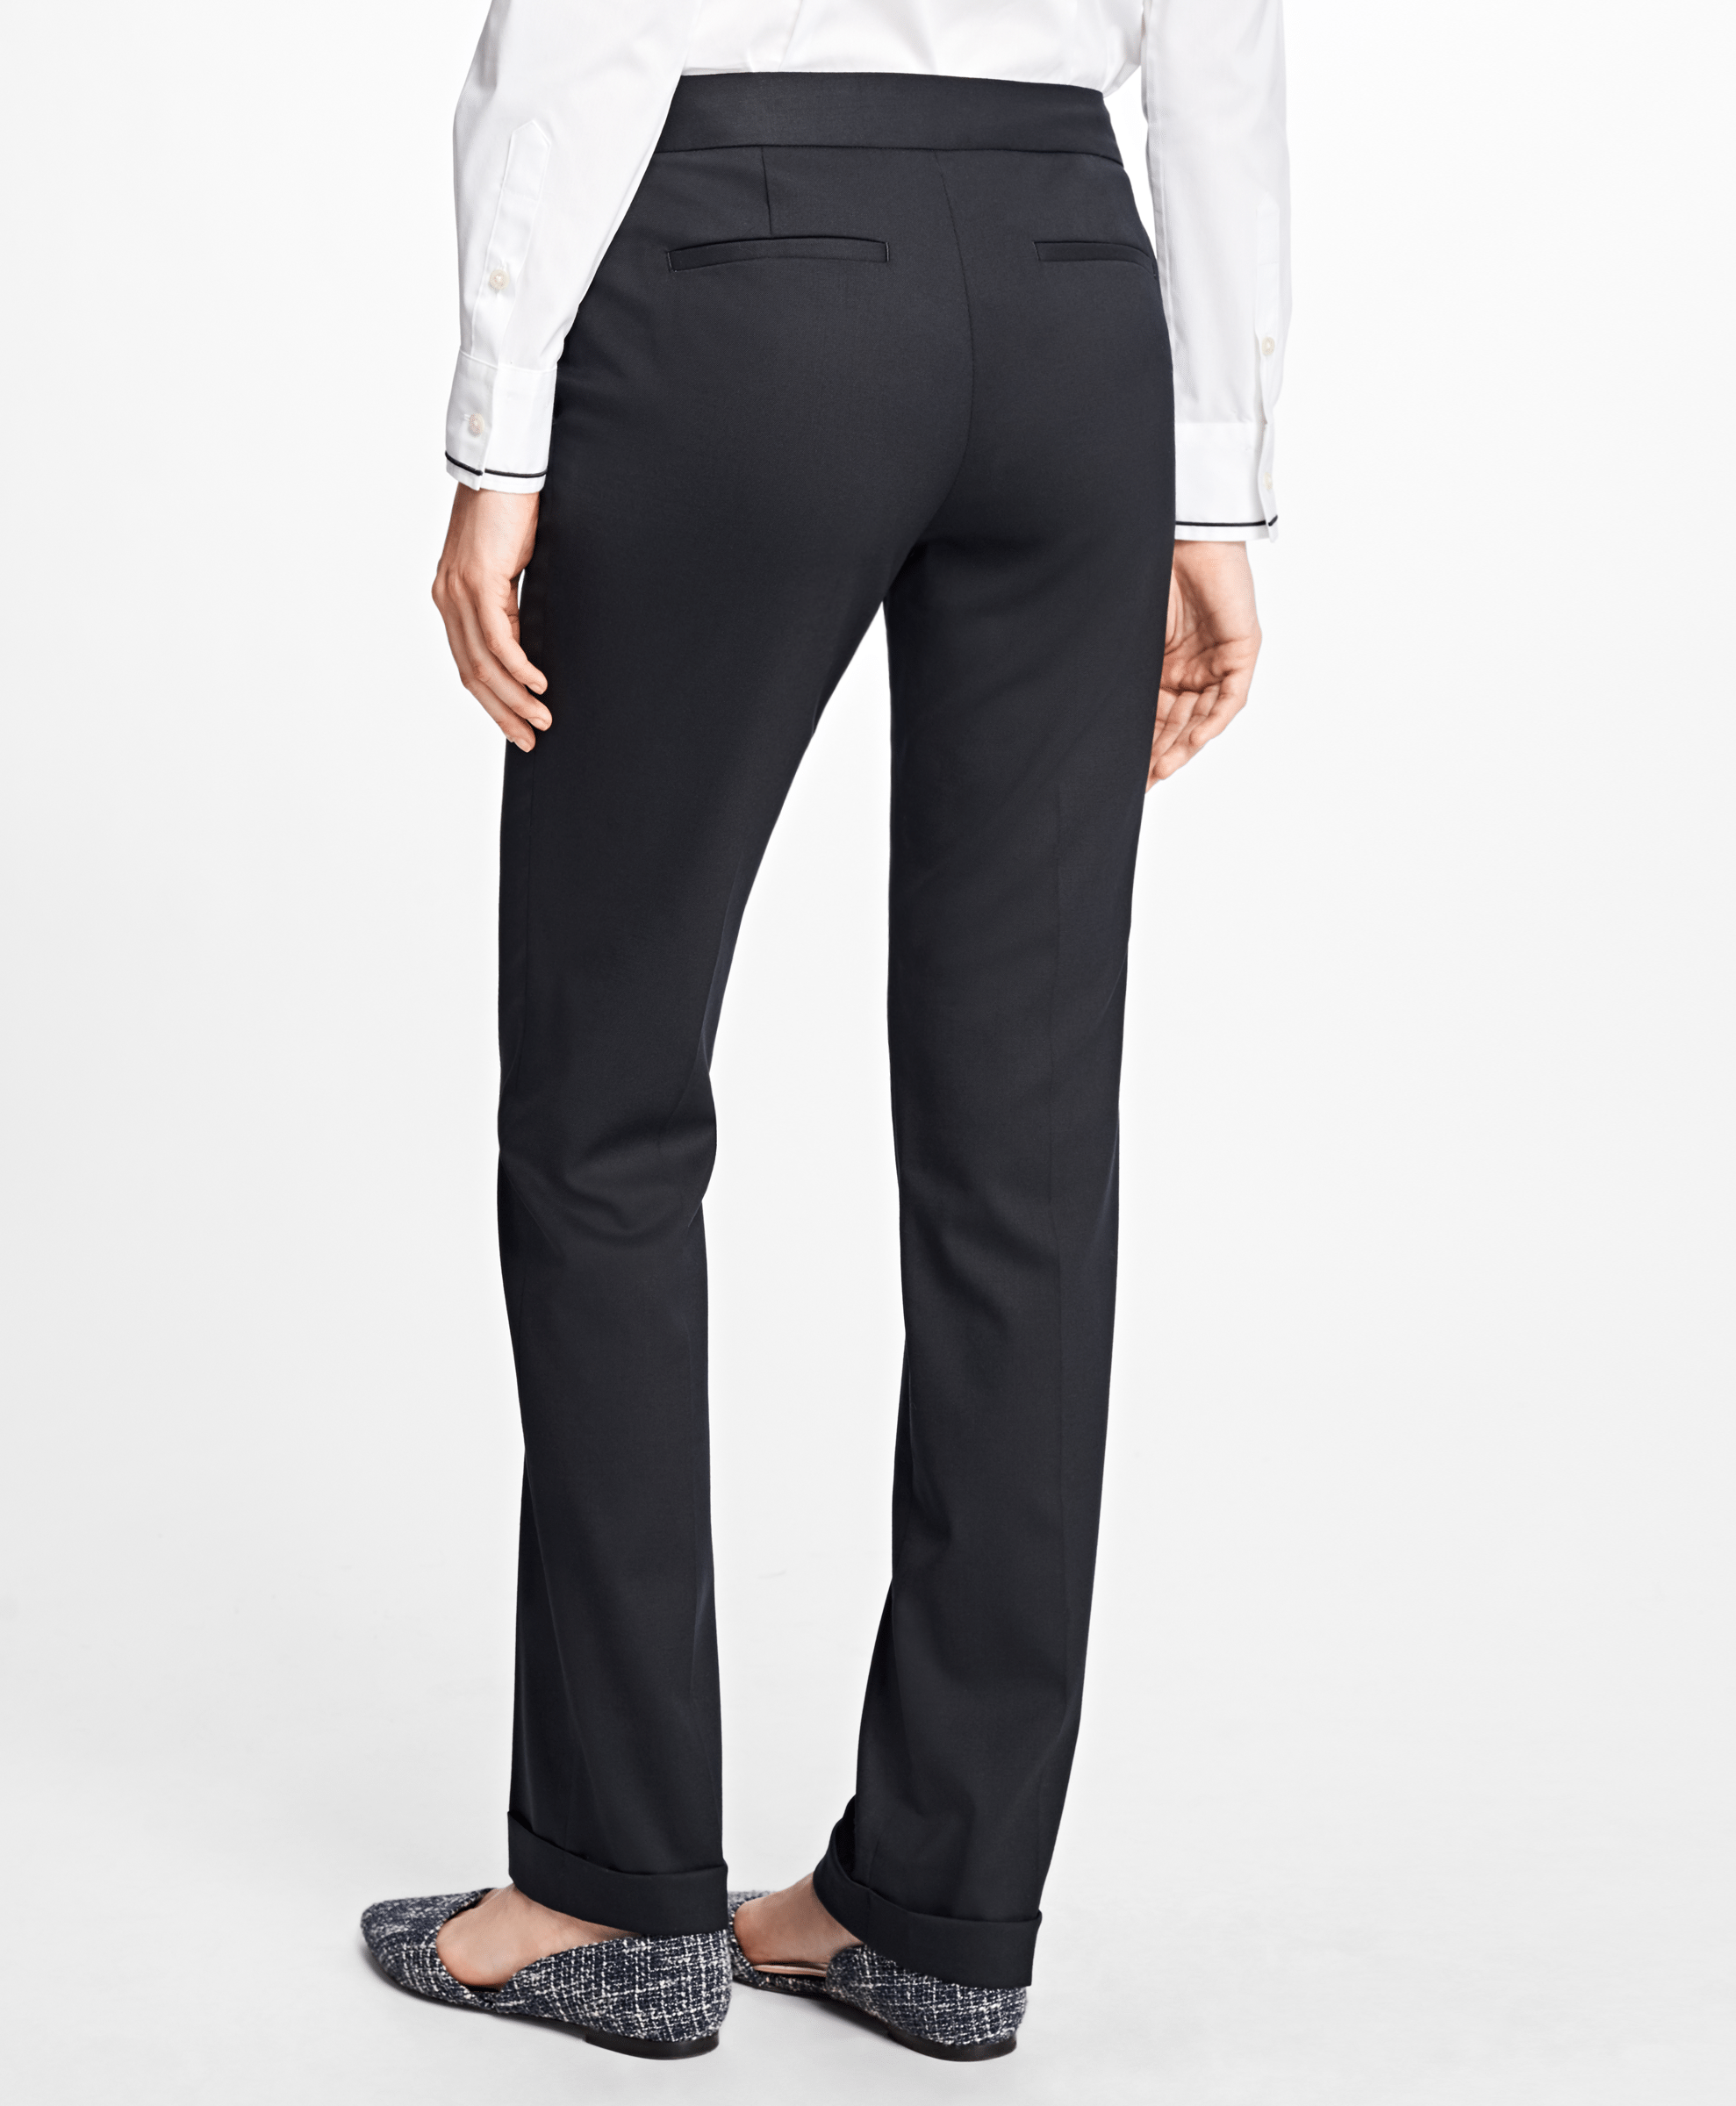 Brooks Brothers Pnt Wl Suiting Black - Womens Dress Trouser